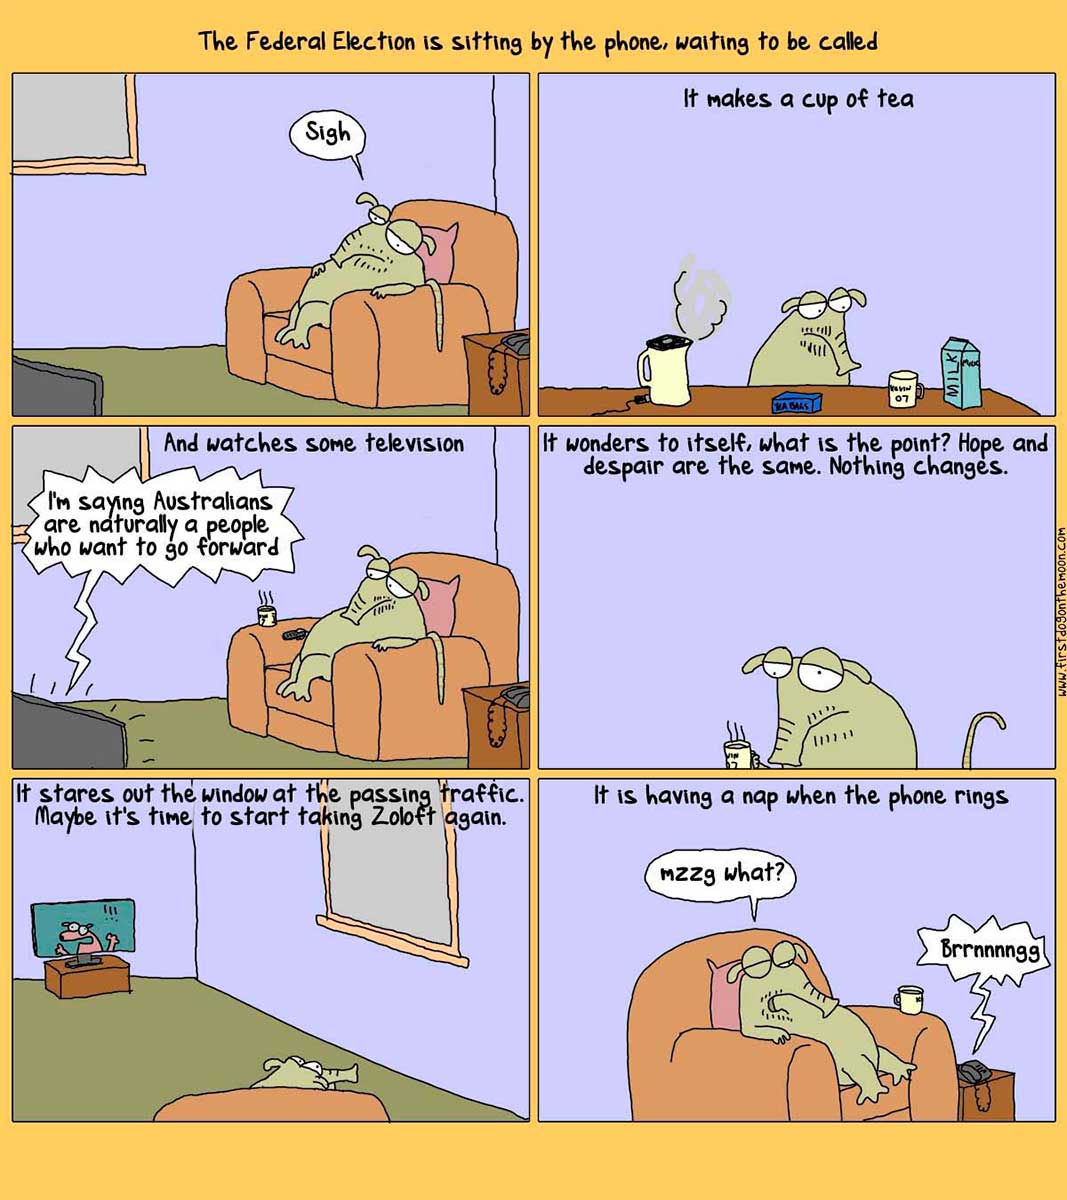 Political cartoon of six panels depicting the federal election as a green long-snouted imaginary animal. At the top of the cartoon is written 'The Federal Election is sitting by the phone, waiting to be called'. In the first panel, the election sits in an armchair, looking bored. In the second panel, the election is making a cup of tea. At the top of the panel is written 'It makes a cup of tea'. In the next panel, the election is watching television. At the top of the panel is written 'And watches some television'. A speech bubble emerges from the television. It says 'I'm saying Australians are naturally a people who want to go forward'. In the next panel, the election dejectedly drinks its tea. At the top of the panel is written 'It wonders to itself, what is the point? Hope and despair are the same. Nothing changes'. In the next panel, the election sits in the armchair, staring out of a window. At the top of the panels is written 'It stares out the window at the passing traffic. Maybe it's time to start taking Zoloft again'. In the last panel, the election is still in the armchair. At the top of the panel is written 'It is having a nap when the phone rings'. The election is saying 'Nzzg what?' A ringing phone is next to the chair. - click to view larger image